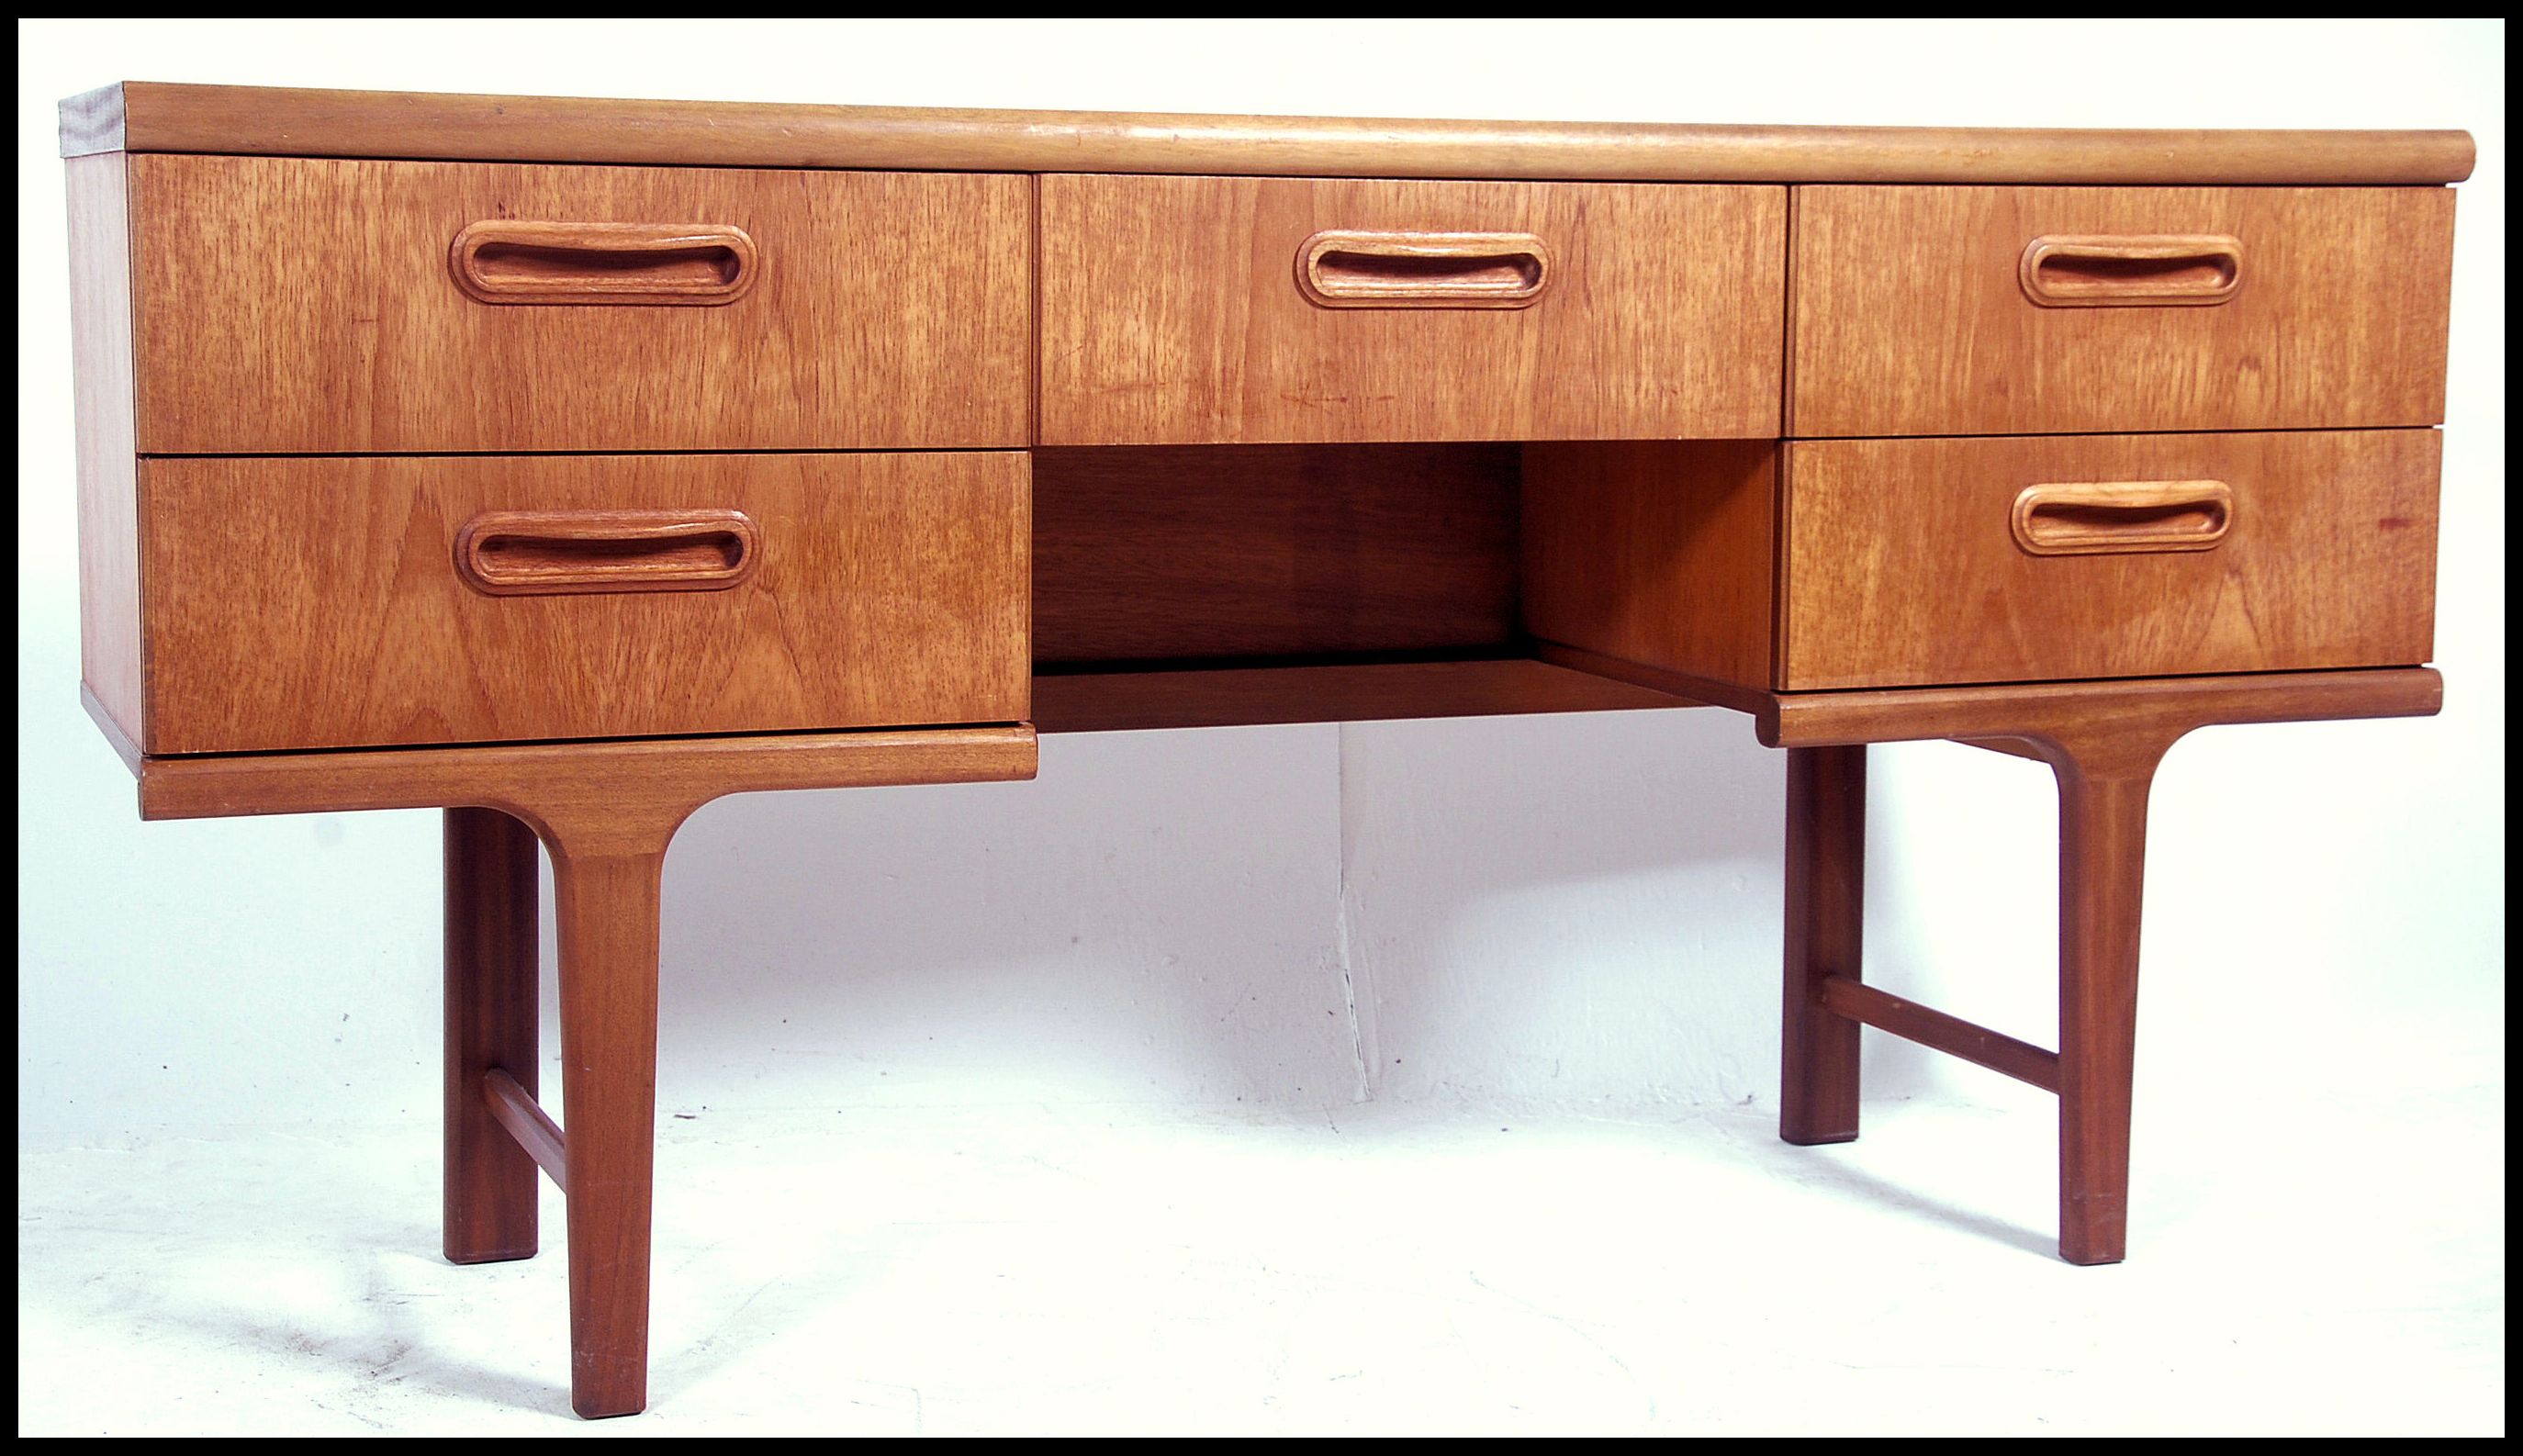 A 1970's Danish inspired retro teak wood writing table desk. The desk with central kneehole recess